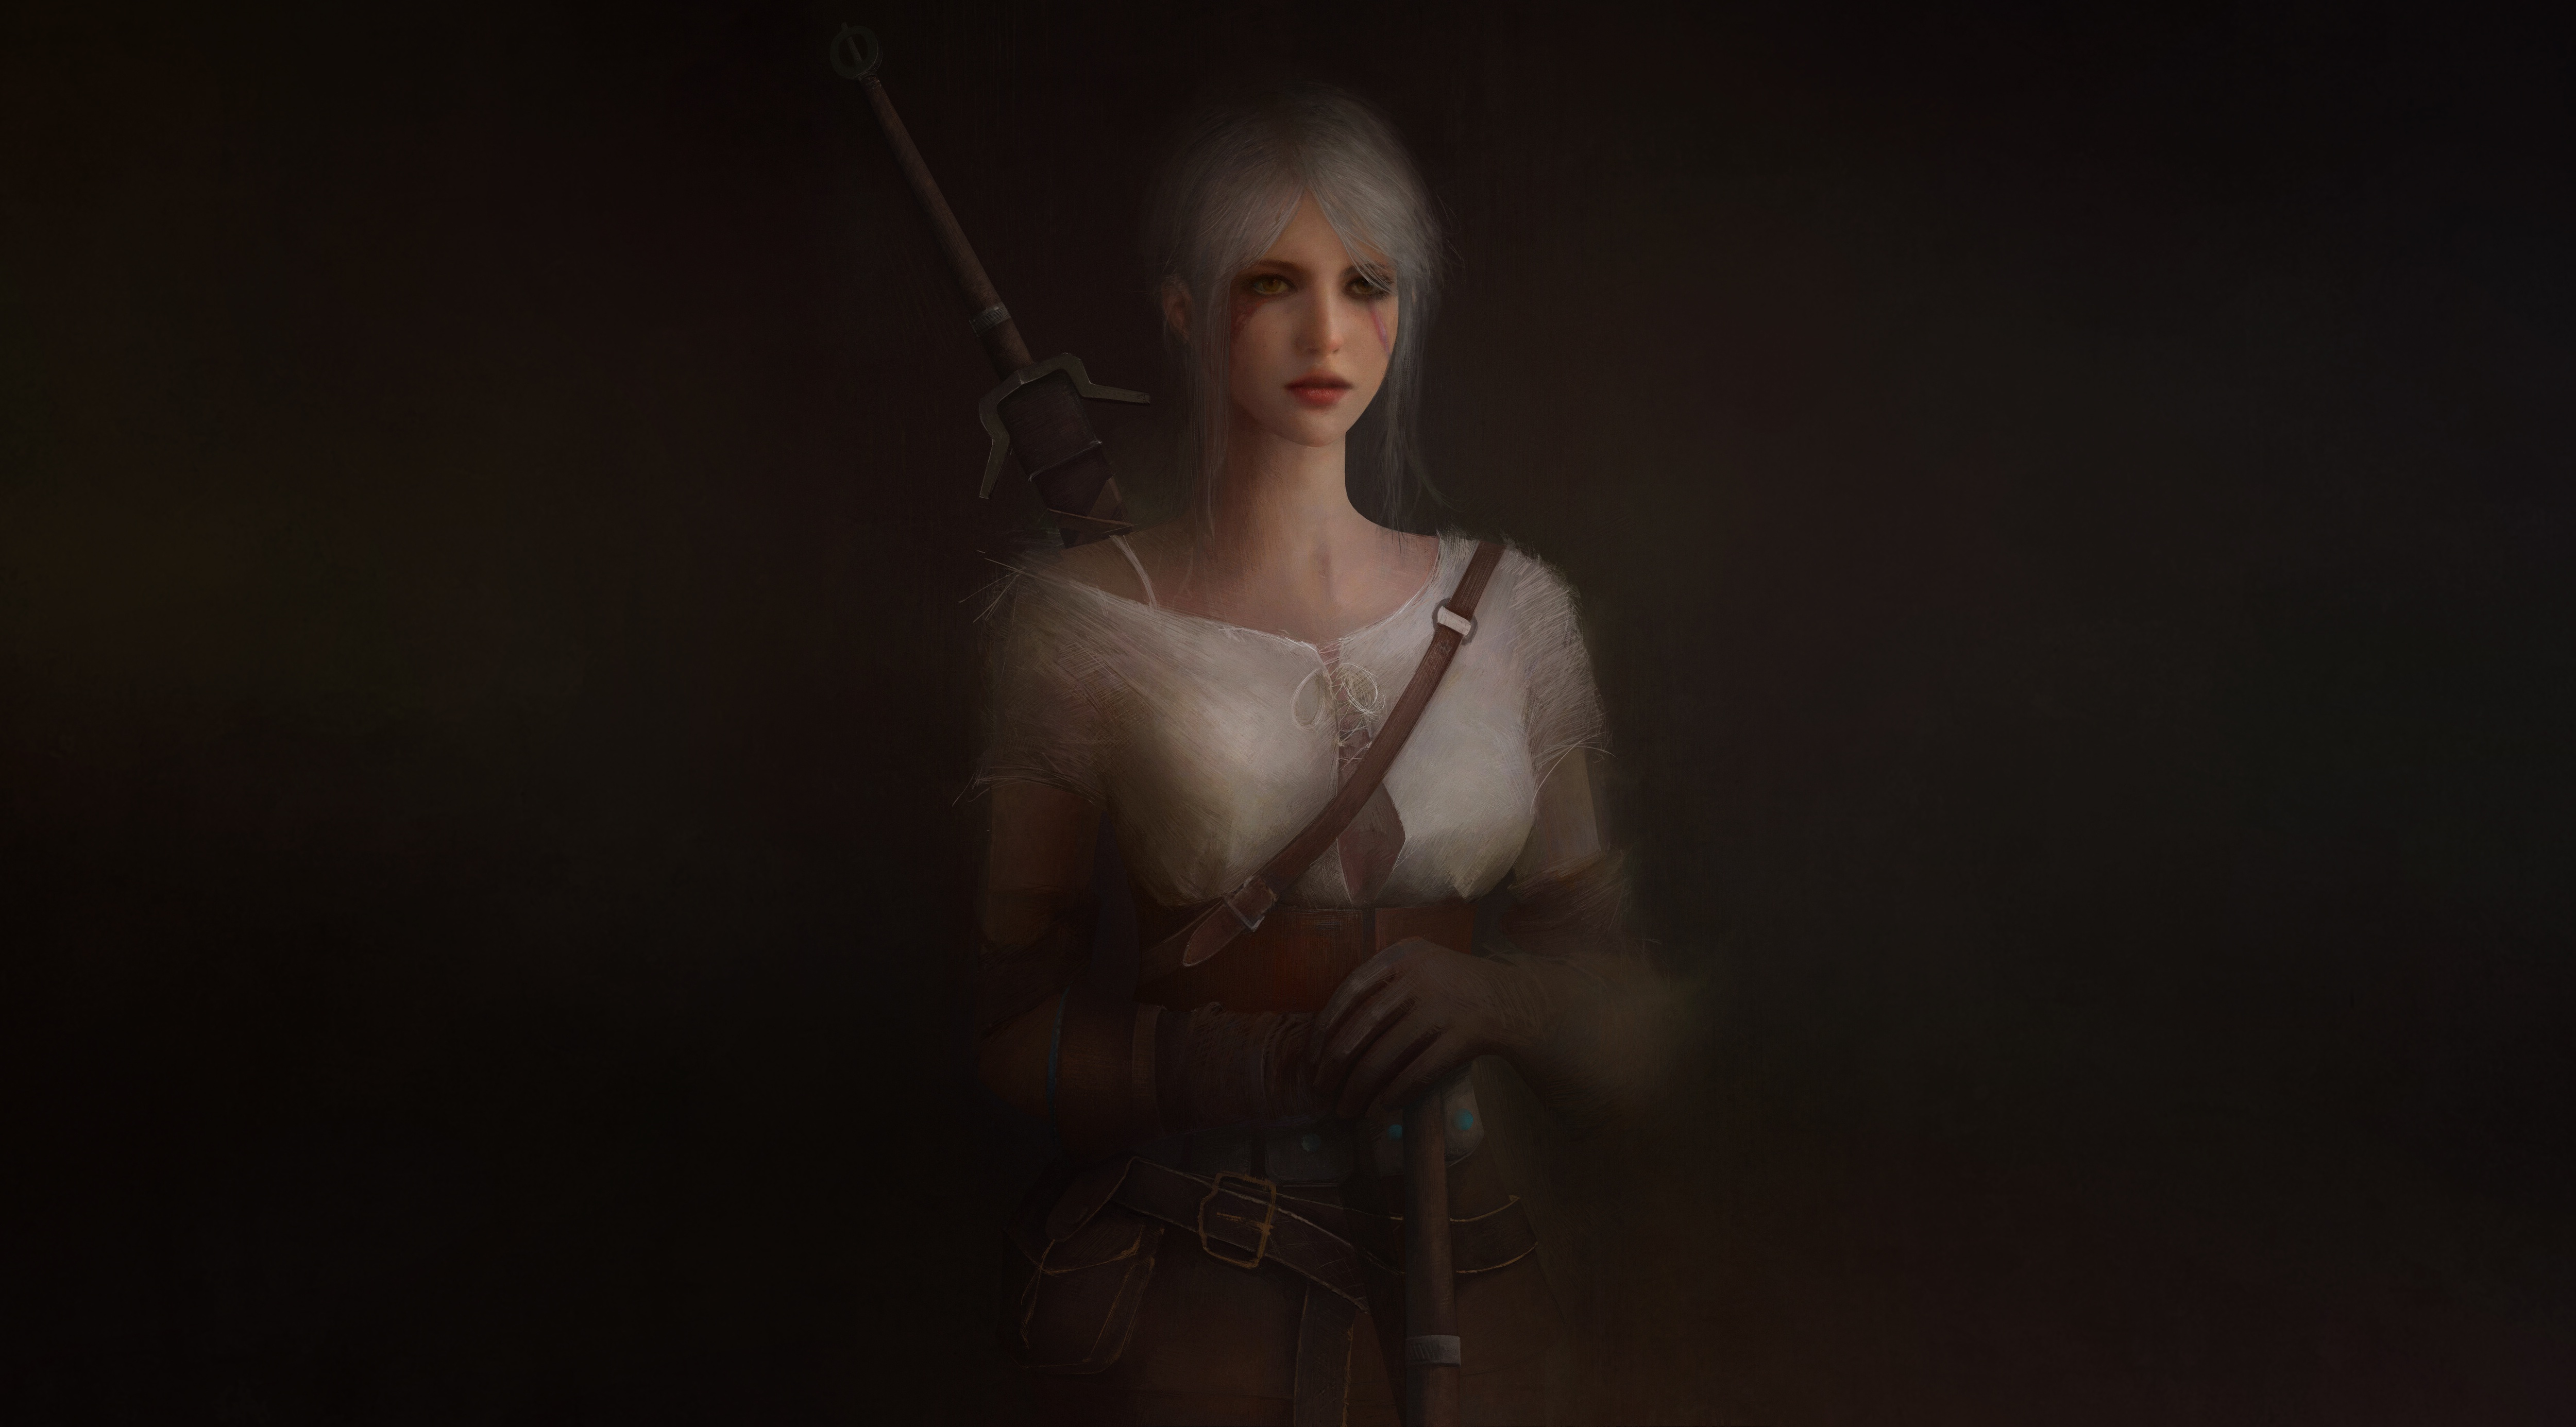 The Witcher 3: Wild Hunt 4k Ultra HD Wallpaper by ARIES s